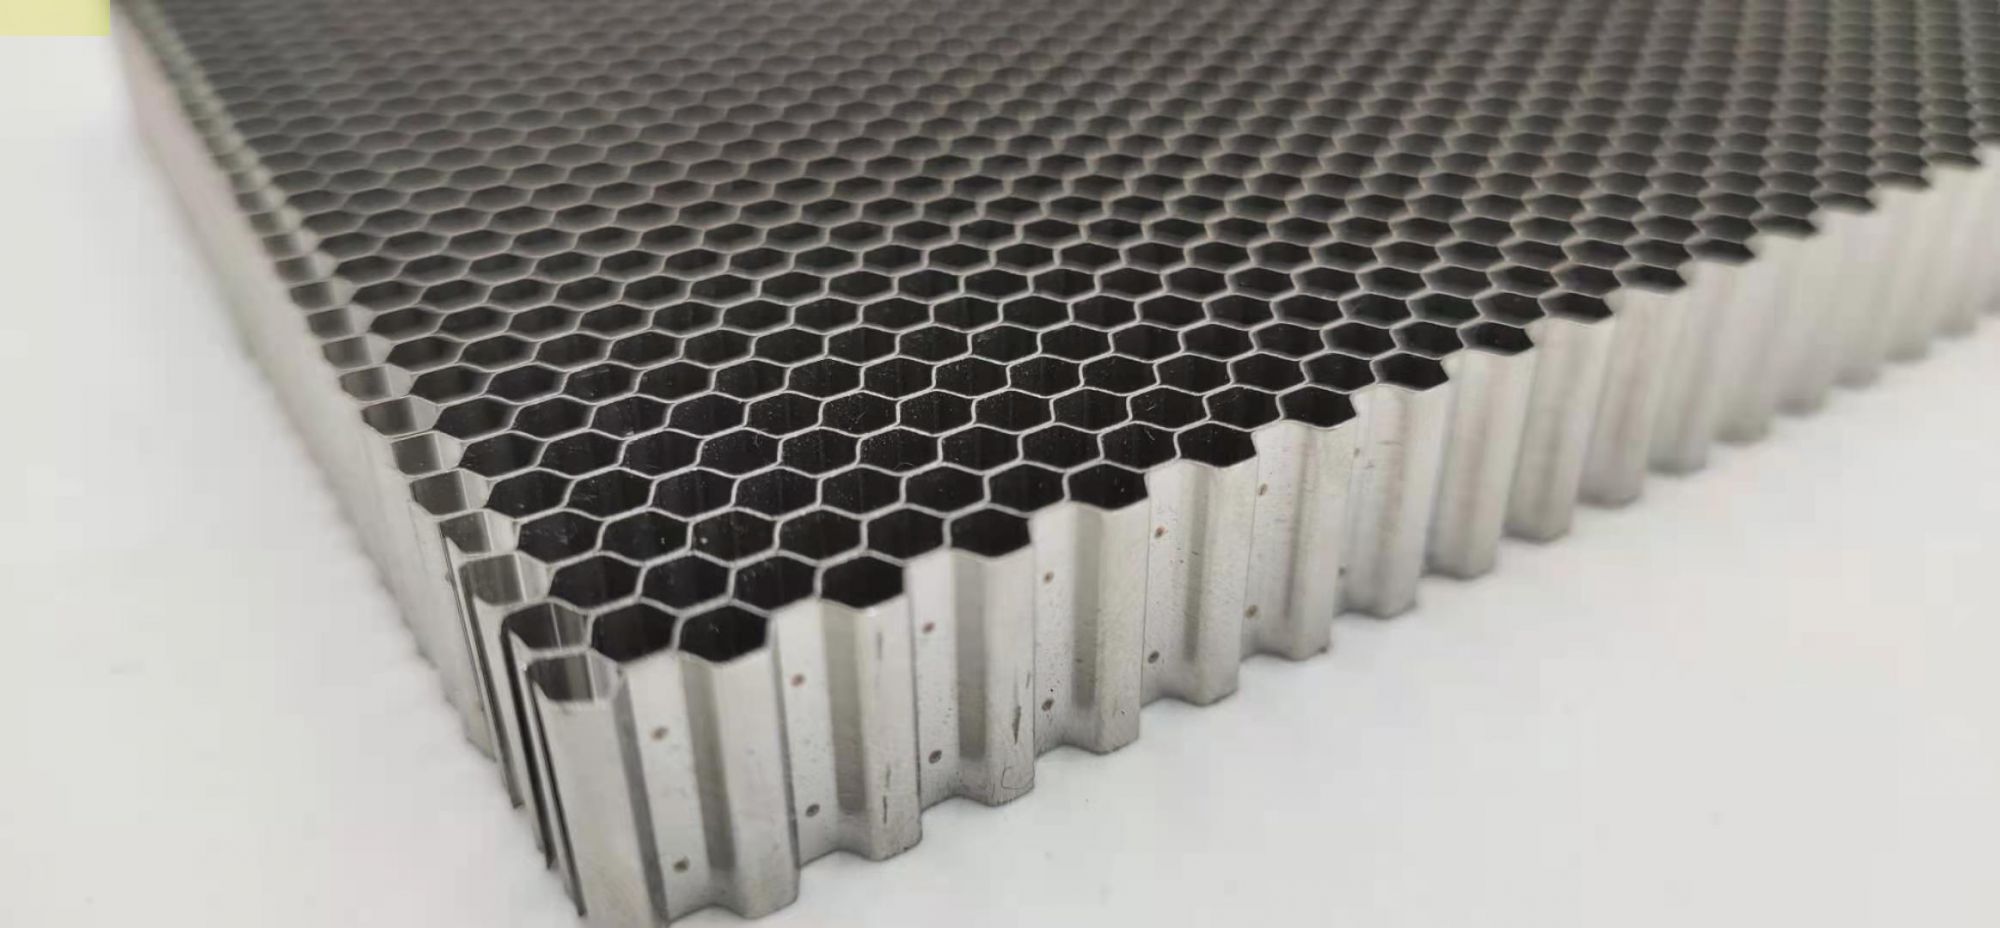 60mm Thick 304 Stainless Steel Honeycomb Core With High Strength